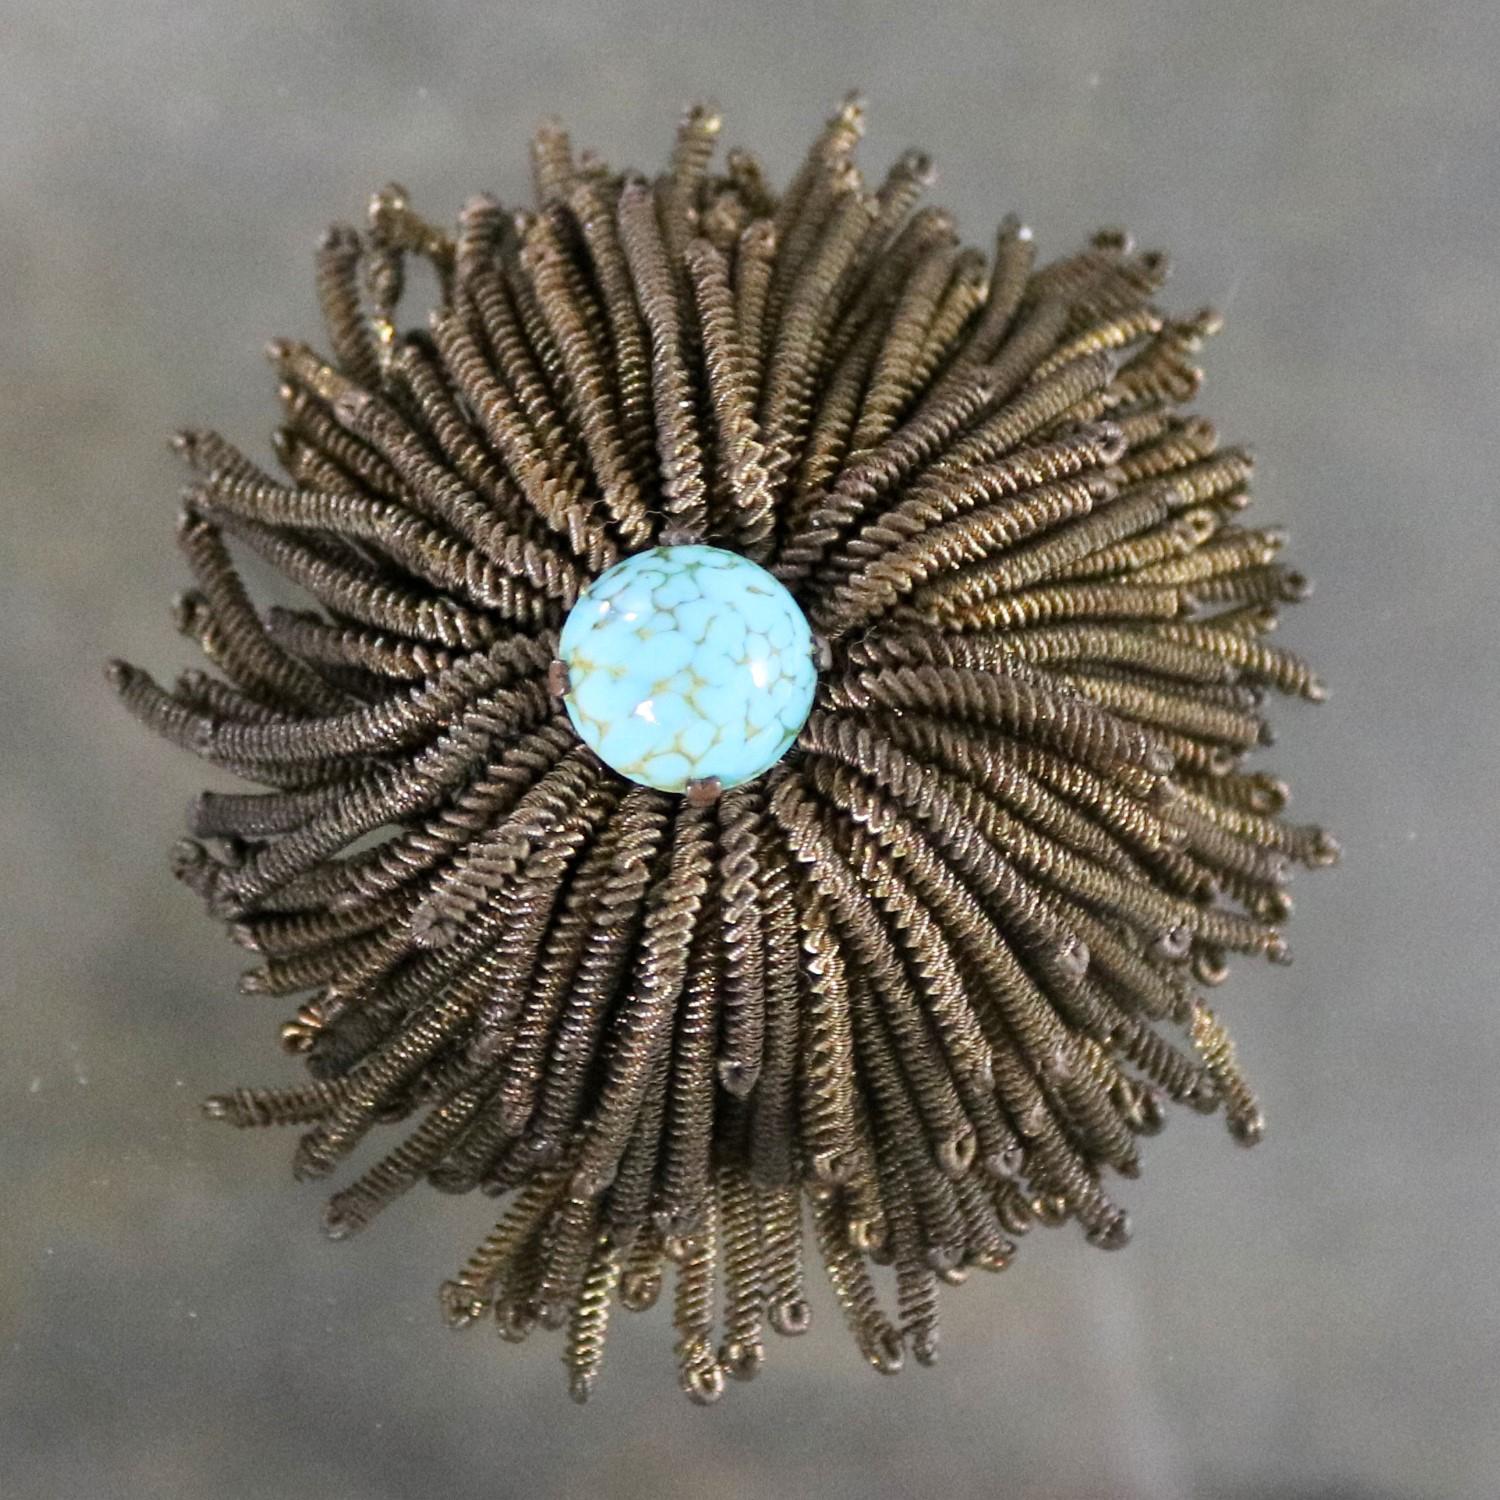 Fabulous vintage French brooch made of twisted gold tone wire fringe to resemble a spider chrysanthemum with a beautiful turquoise colored setting in the centre and marked Déposé as well as Made in France. It is in wonderful vintage condition. We